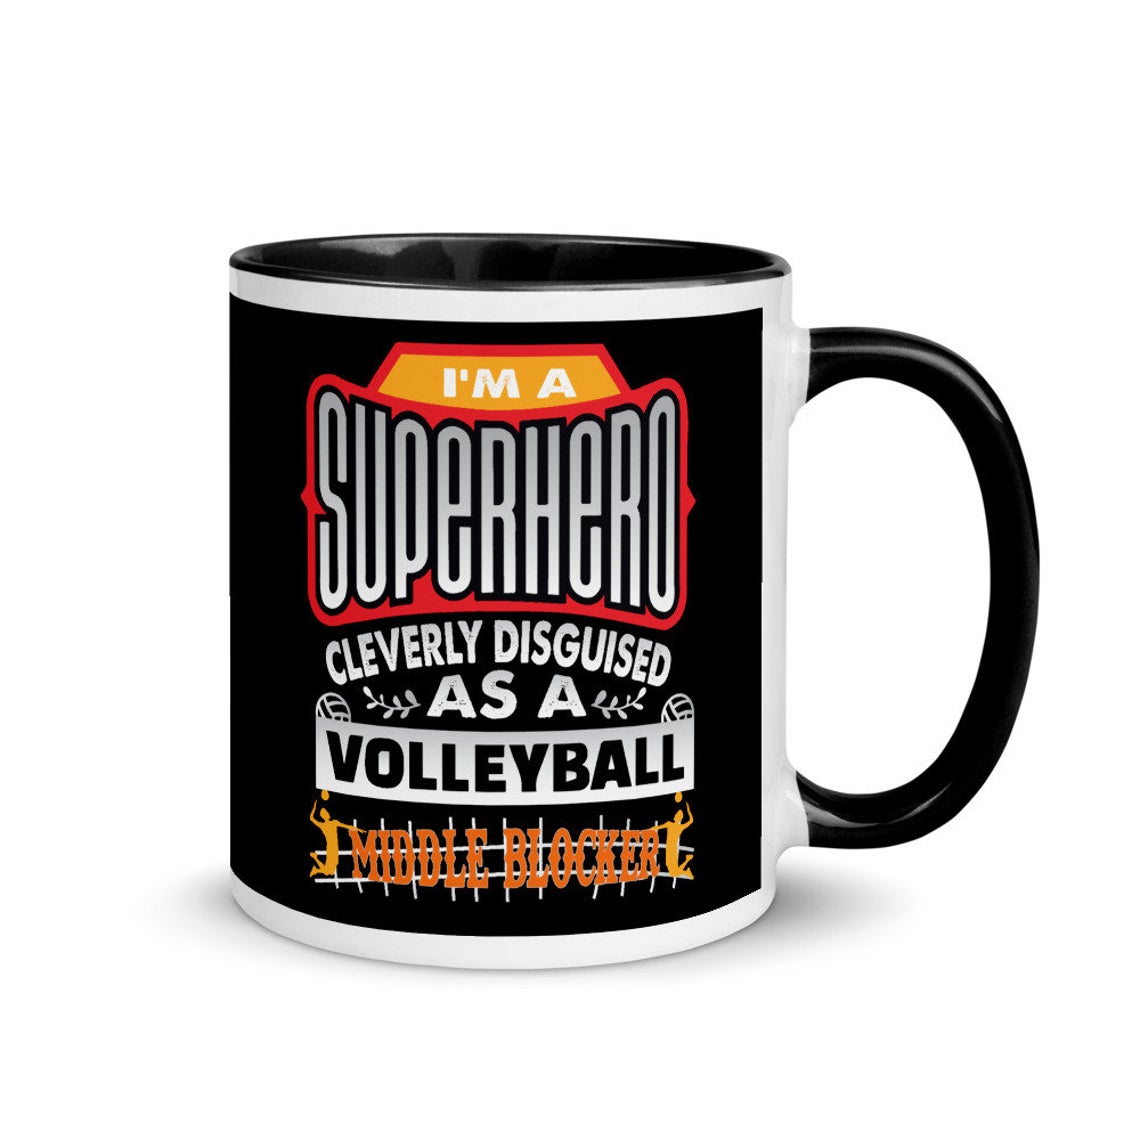 My Volleybragswag volleyabll mug collection includes mugs for hitters, liberos, blockers and coaches as well as the VBS Beast Collection featuring animal players.